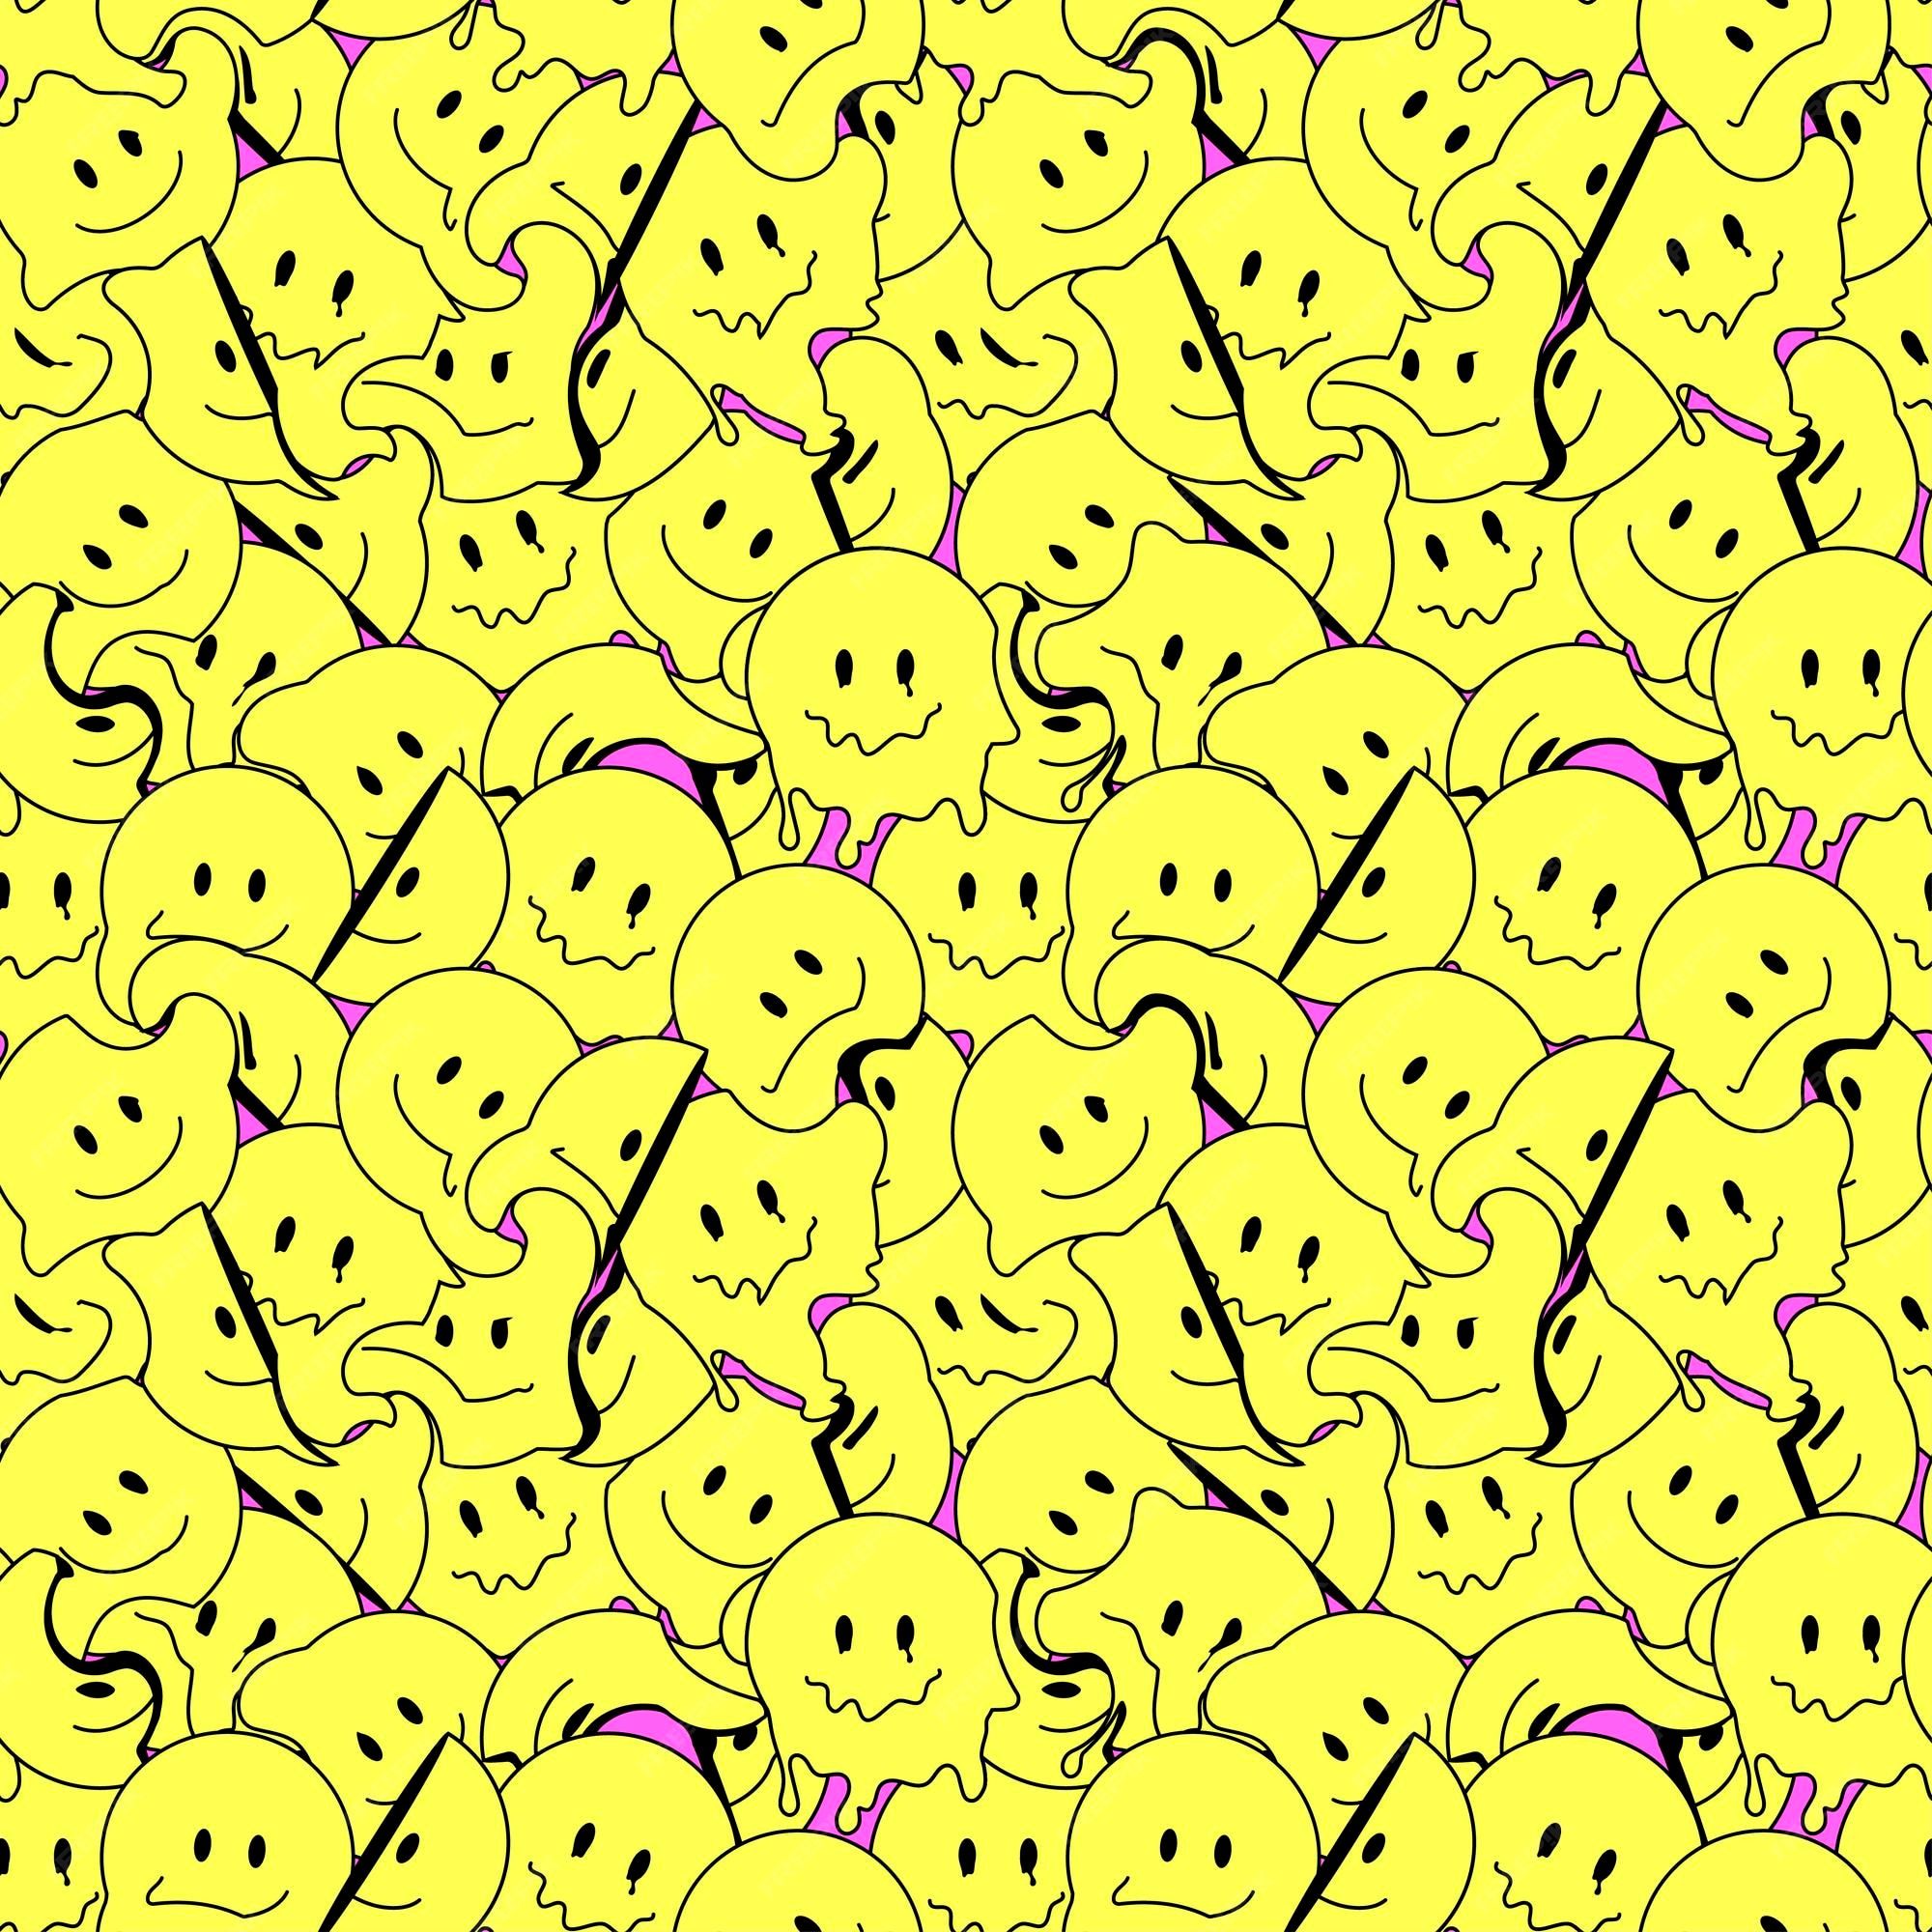 Premium Vector. Funny smile crazy melted face seamless pattern art vector illustration psychedelic retrro graphic positive good vibes smiley faces acid high melt trip wallpaper seamless pattern y2k aesthetic